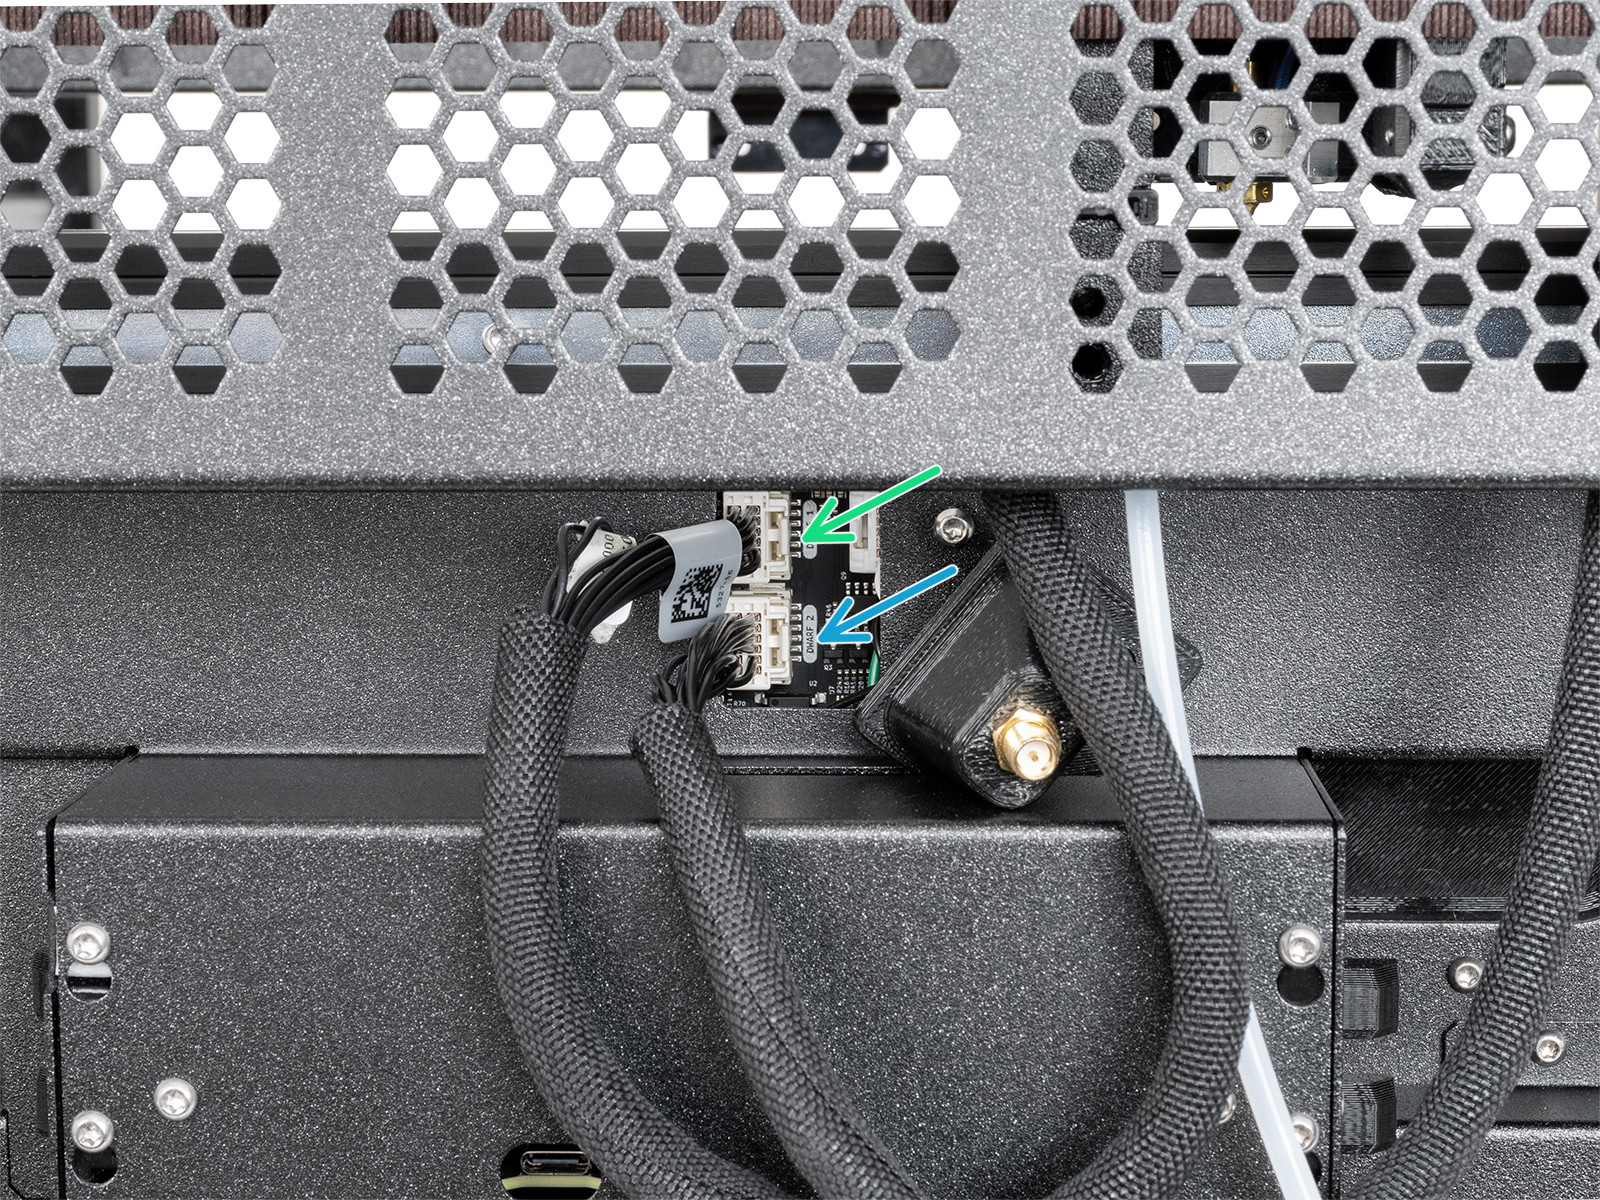 Disconnecting the Nextruder cable